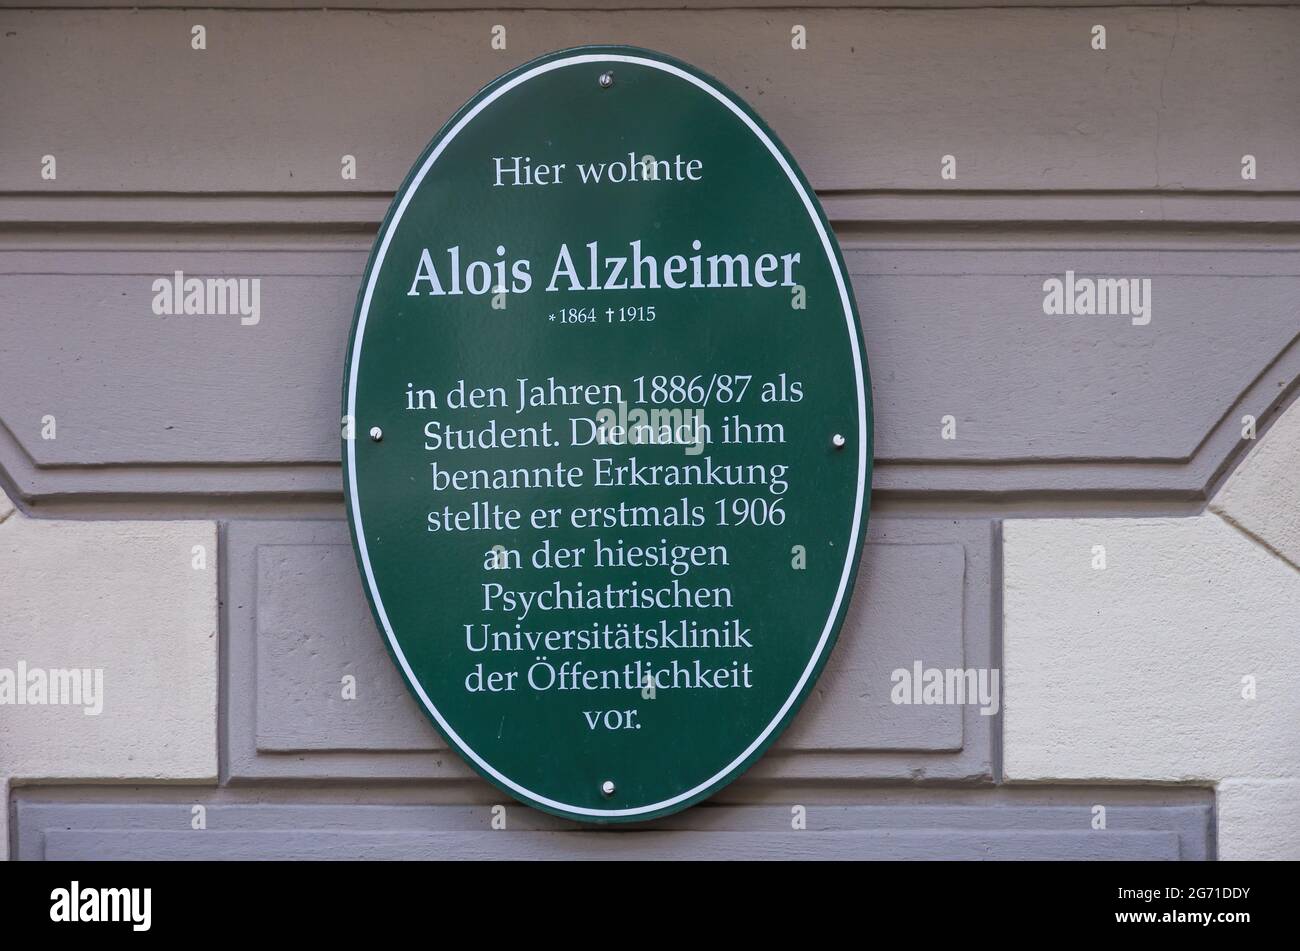 Symbolic and conceptual image: Alzheimer's dementia; note that Alois Alzheimer lived there as a student in Tübingen, Germany. Stock Photo